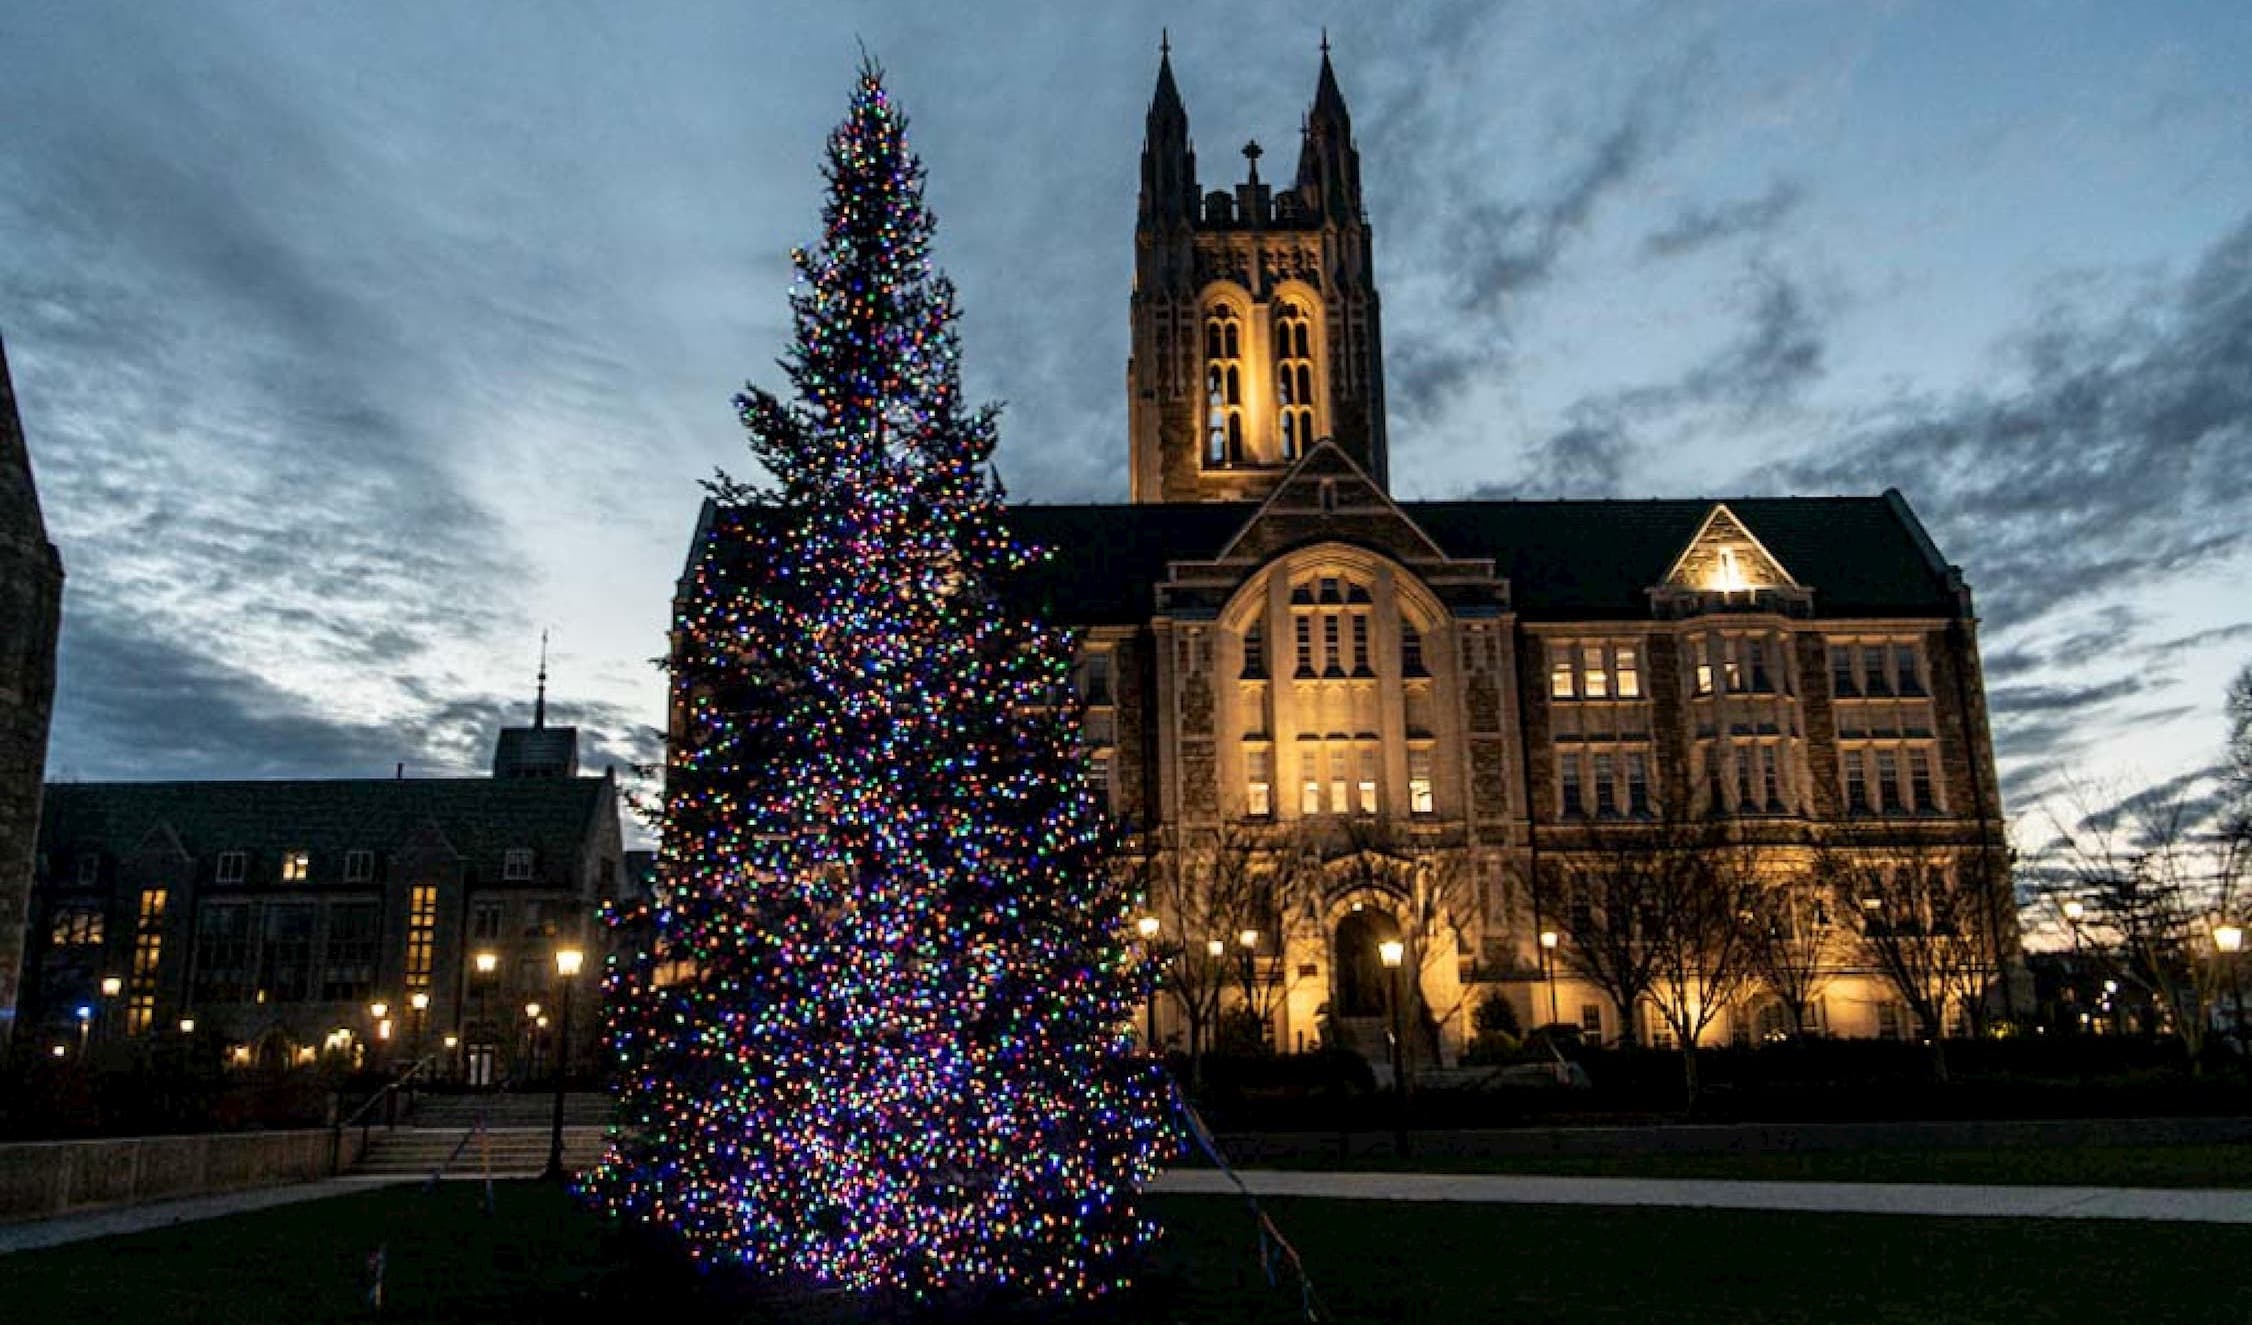 lit Christmas tree at dusk with Gasson Hall in the background